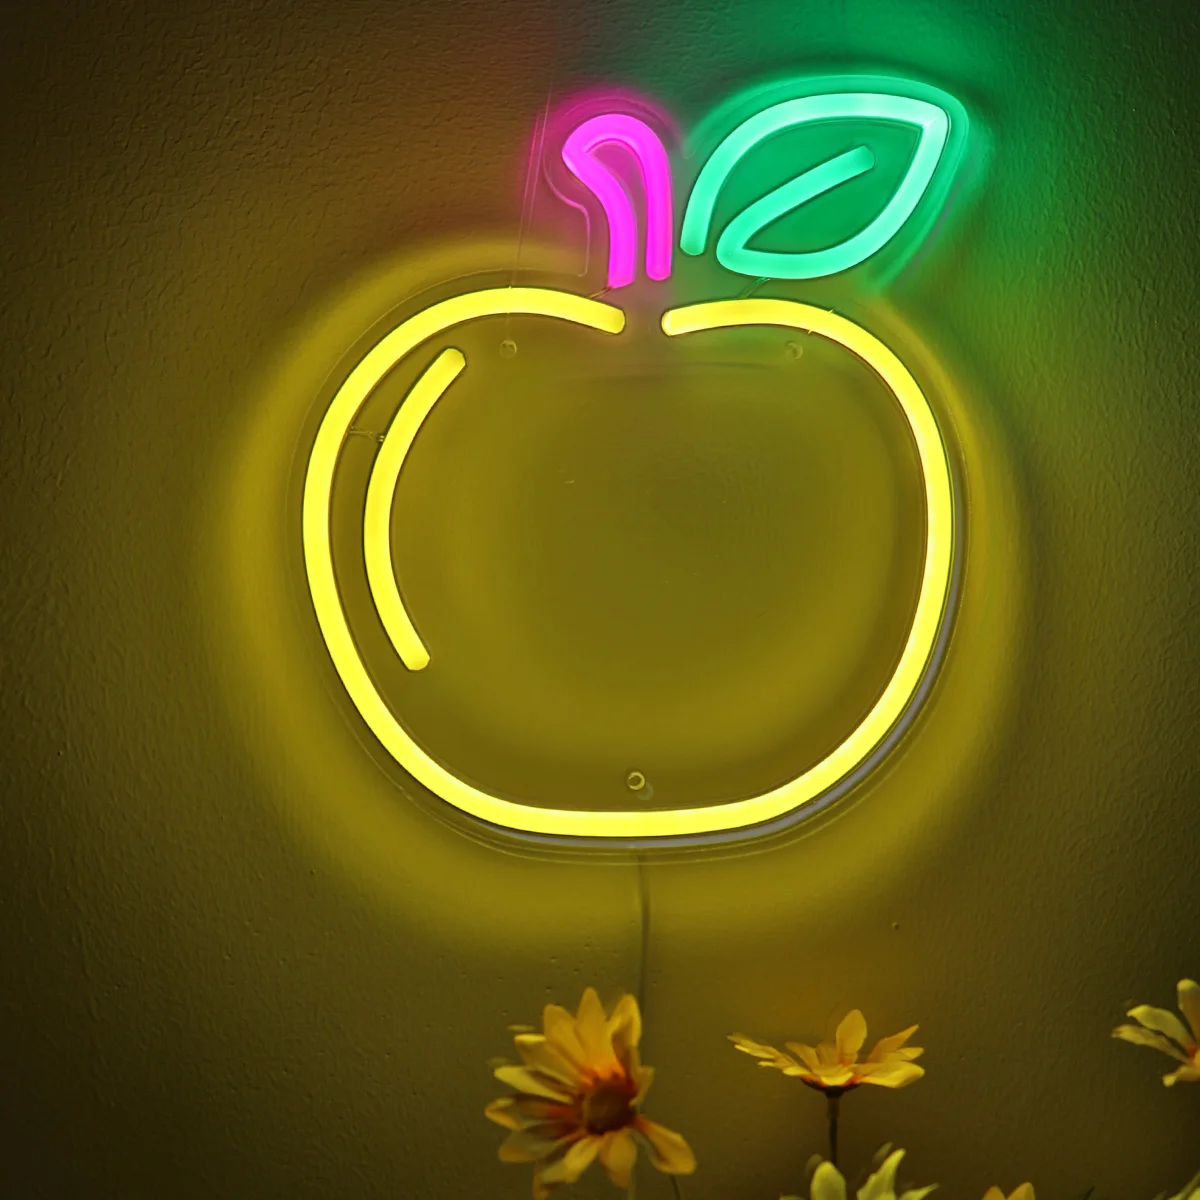 1pc Golden LED Wall Neon Sign Light For Fruit Shop Wall Party Kitchen Room Decoration 8.31''*9.45''